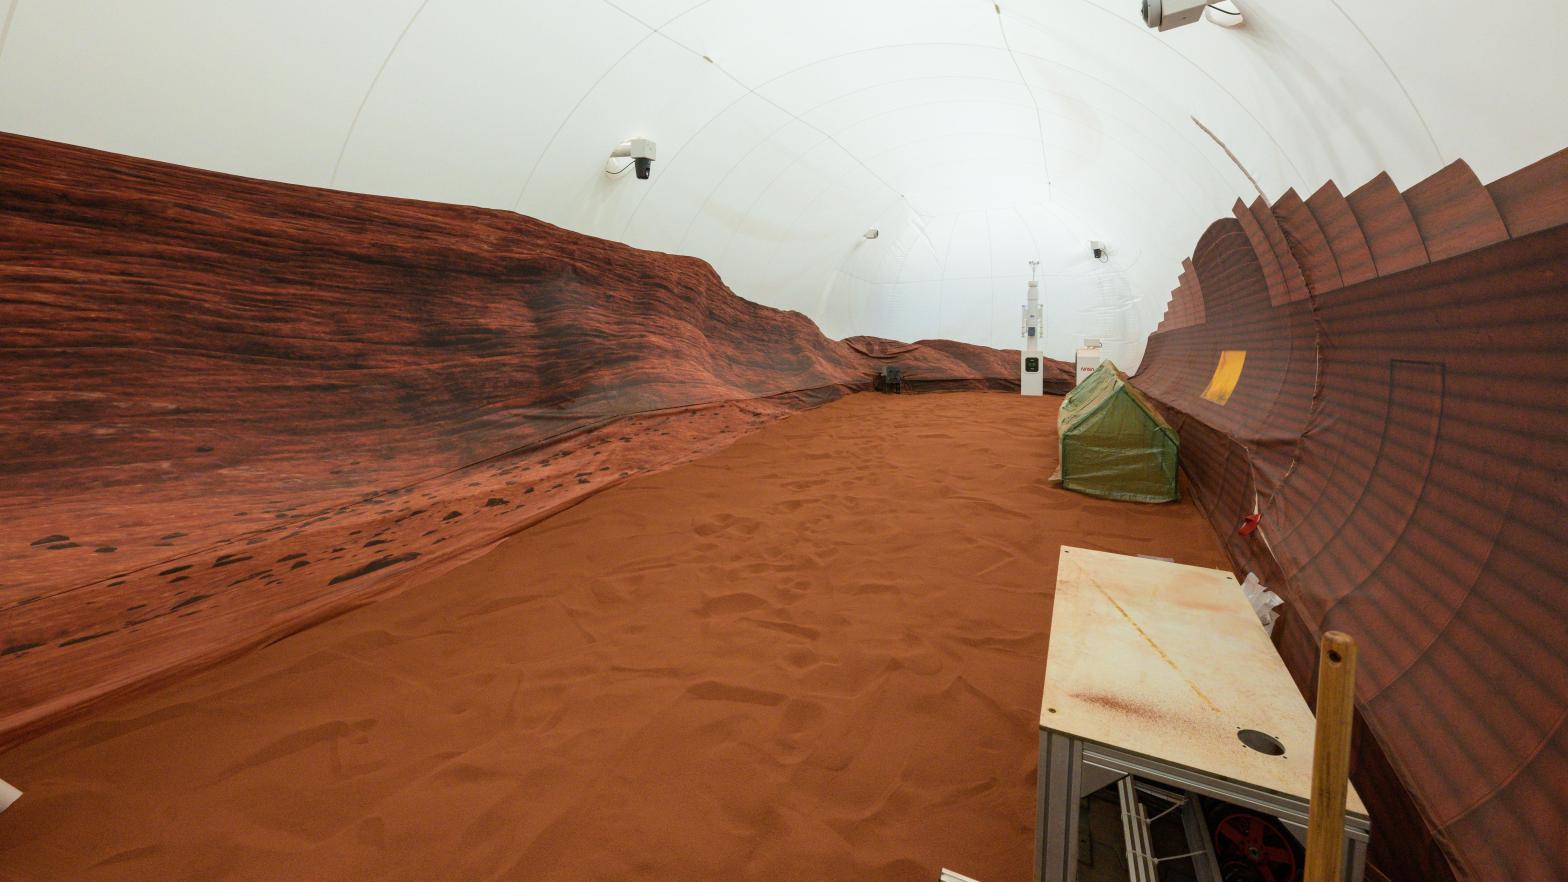 The simulated Mars habitat includes a 1,200-square-foot sandbox with red sand to simulate the Martian landscape.  (Photo: NASA)